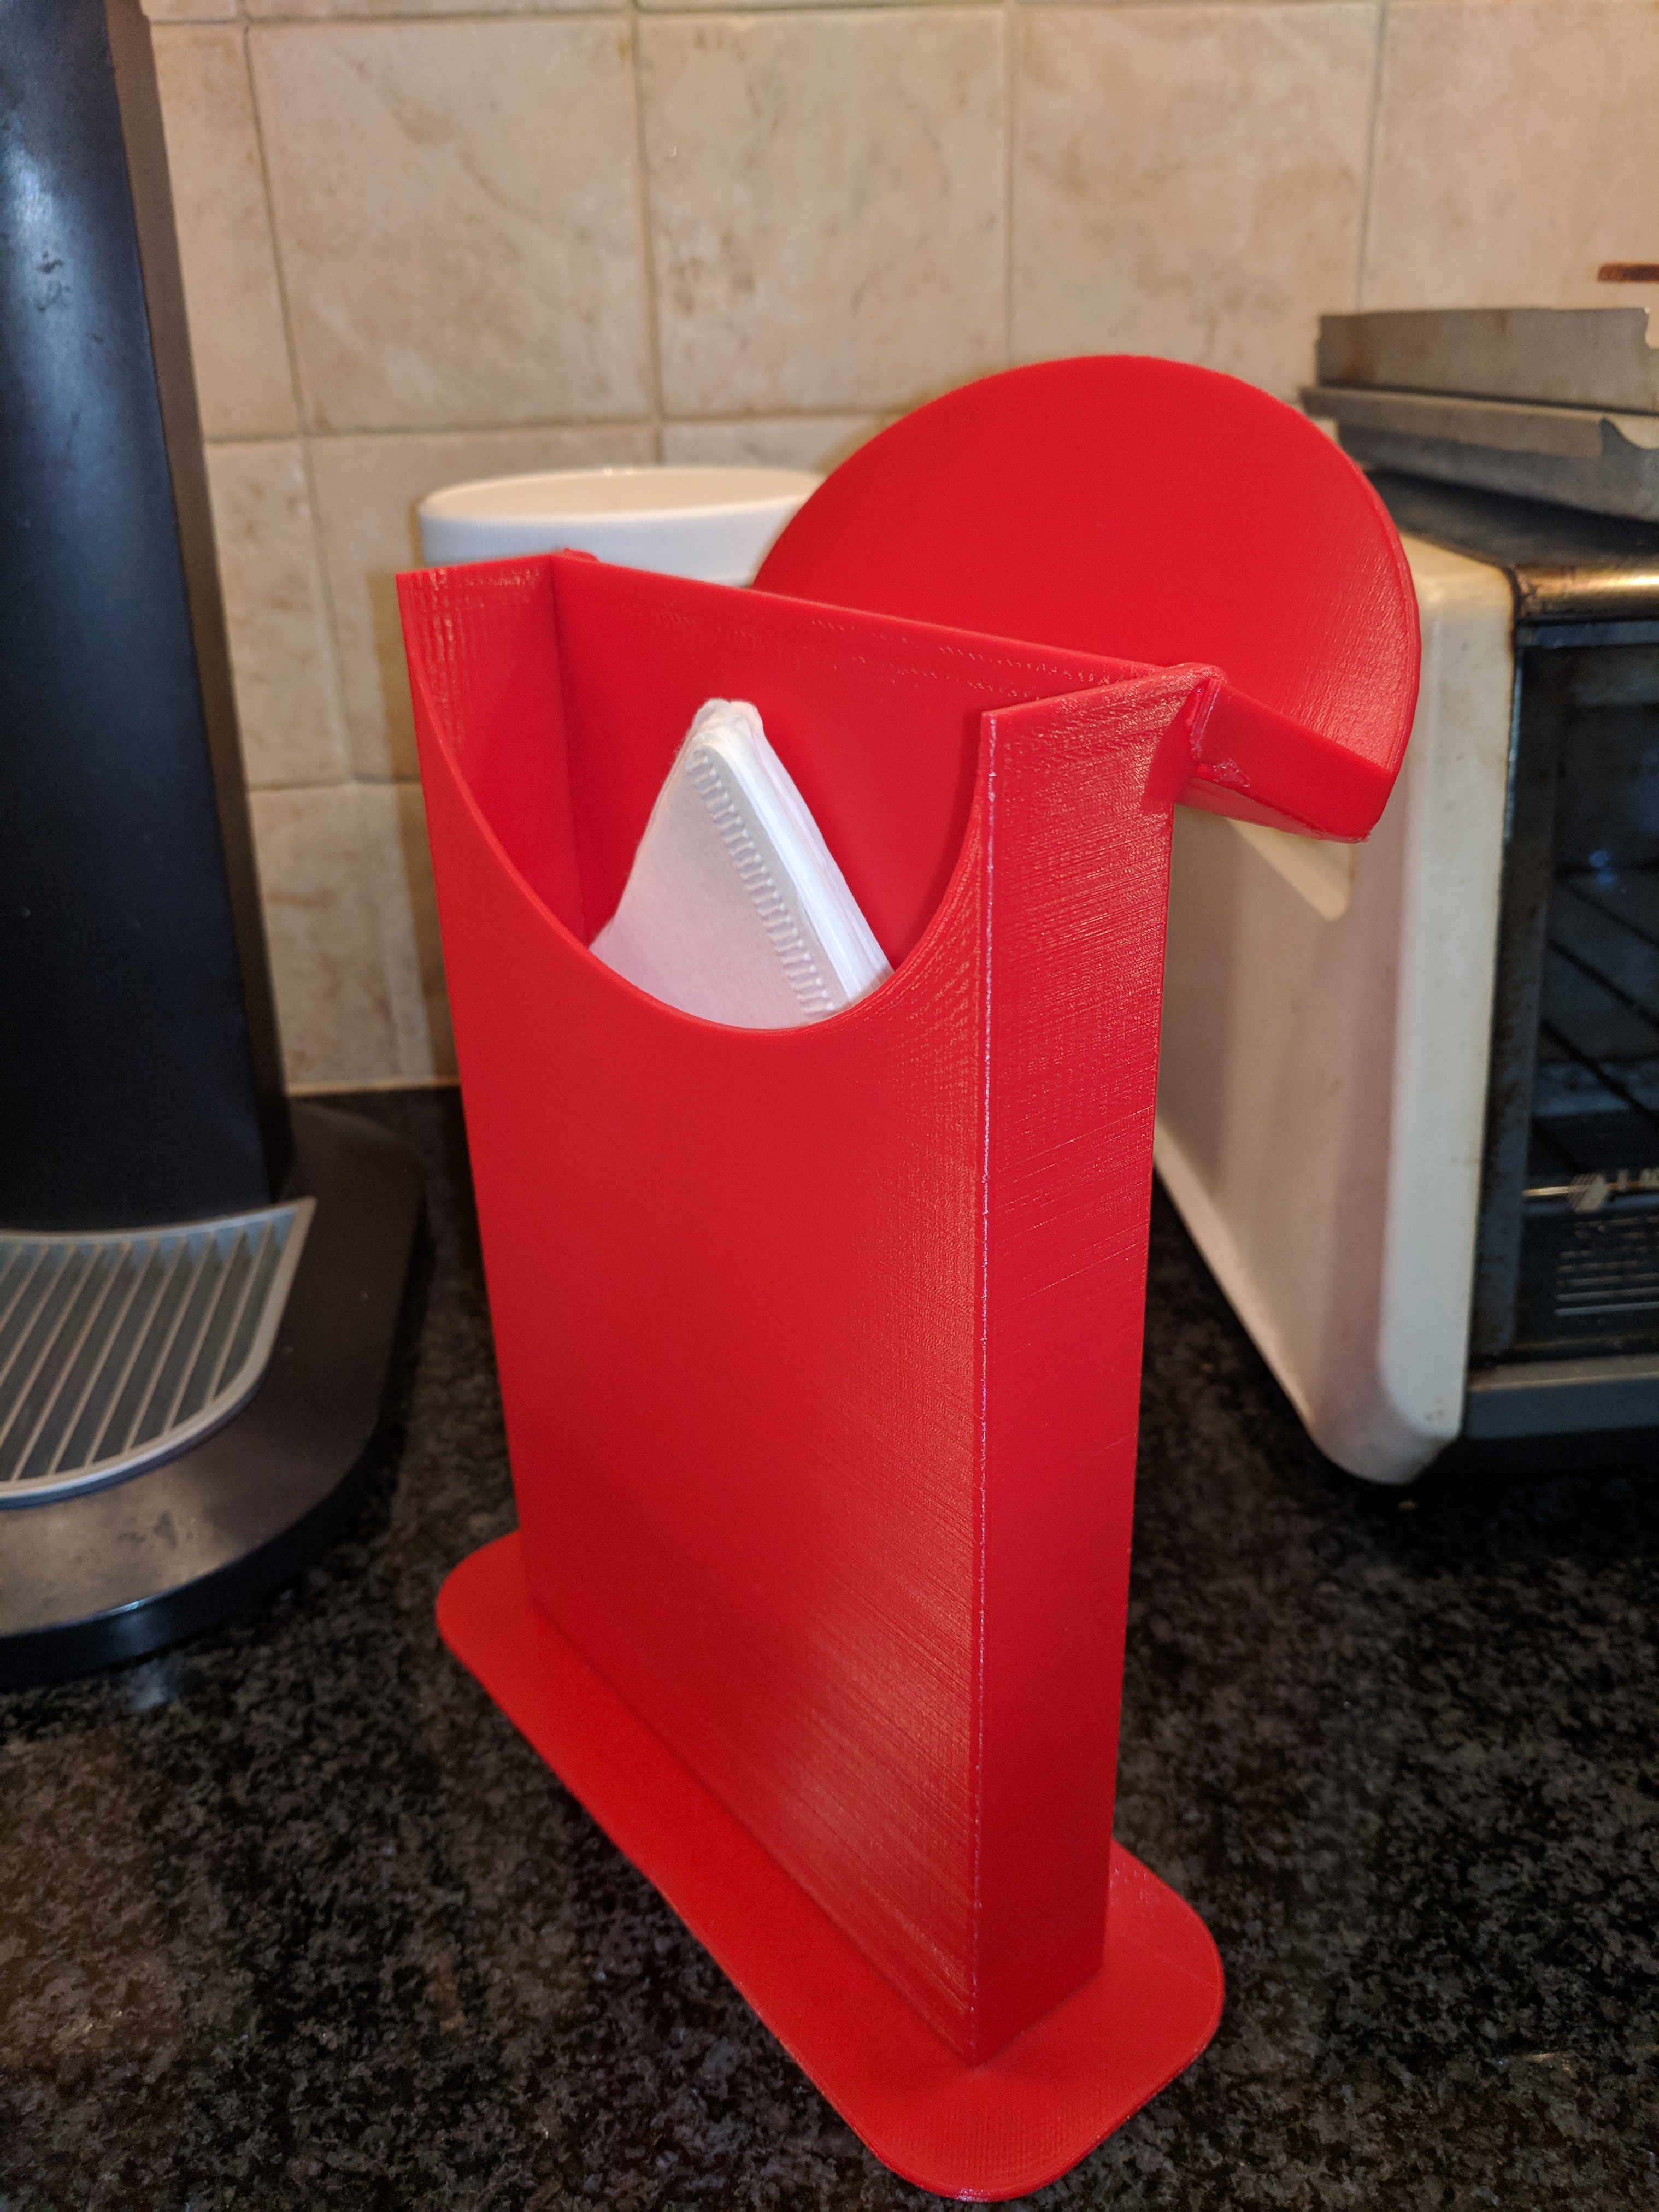 Coffee Filter Caddy